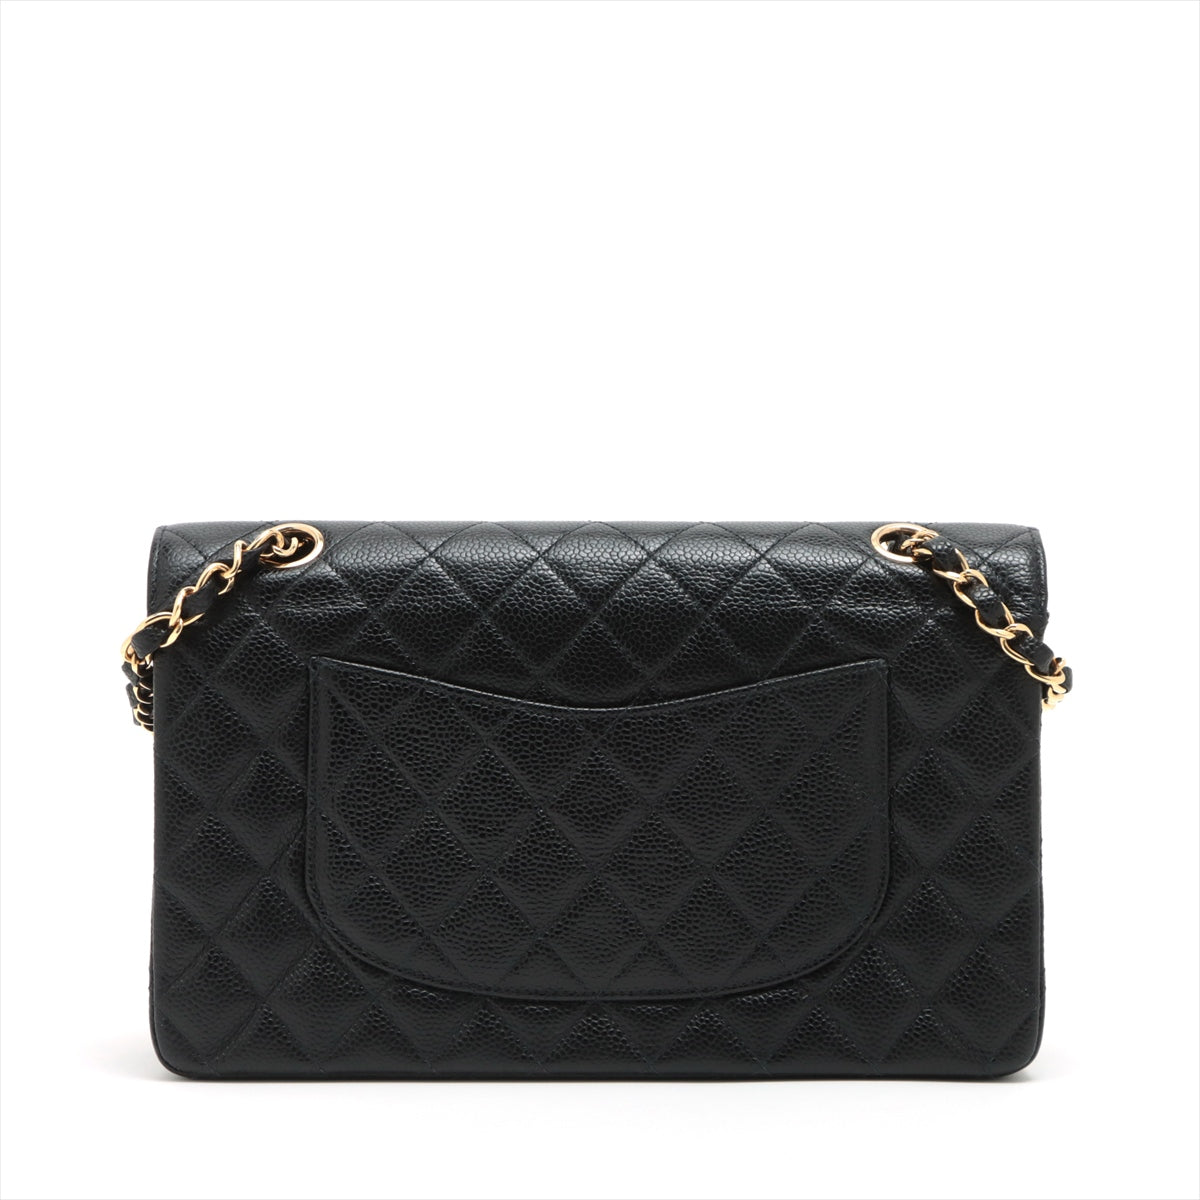 Chanel Matelasse Caviarskin Double flap Double chain bag Black Gold Metal fittings 7XXXXXX Comes with other galleries